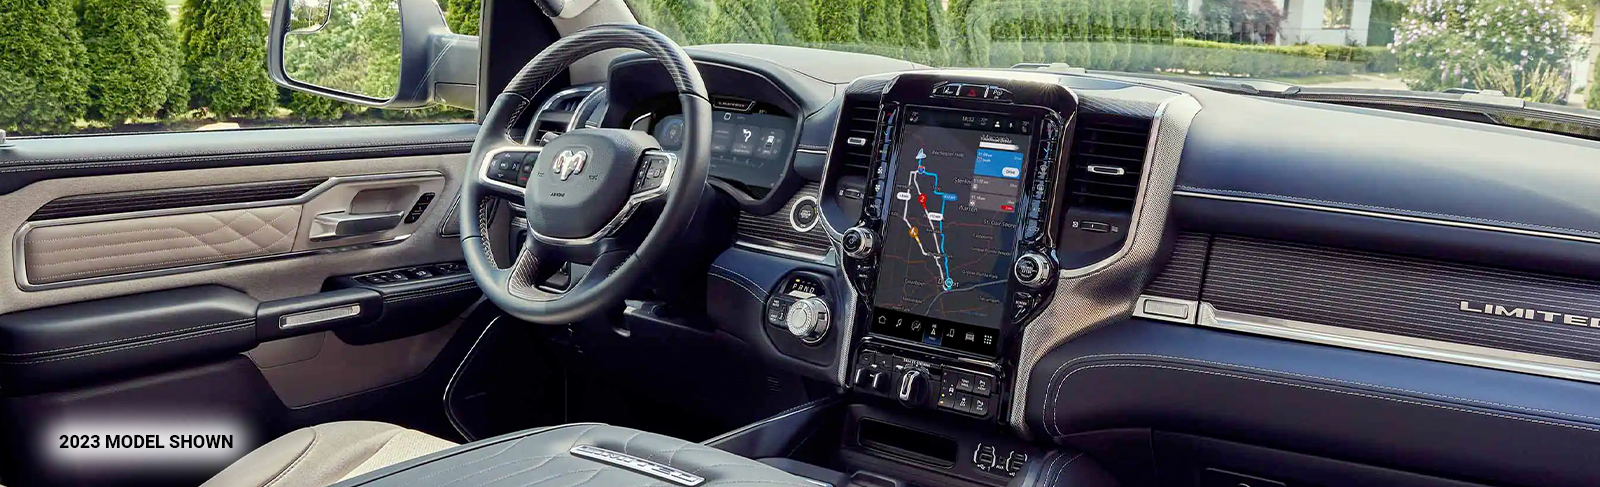 The interior of the 2023 Ram 1500 with the large Uconnect touchscreen displaying a navigation map.